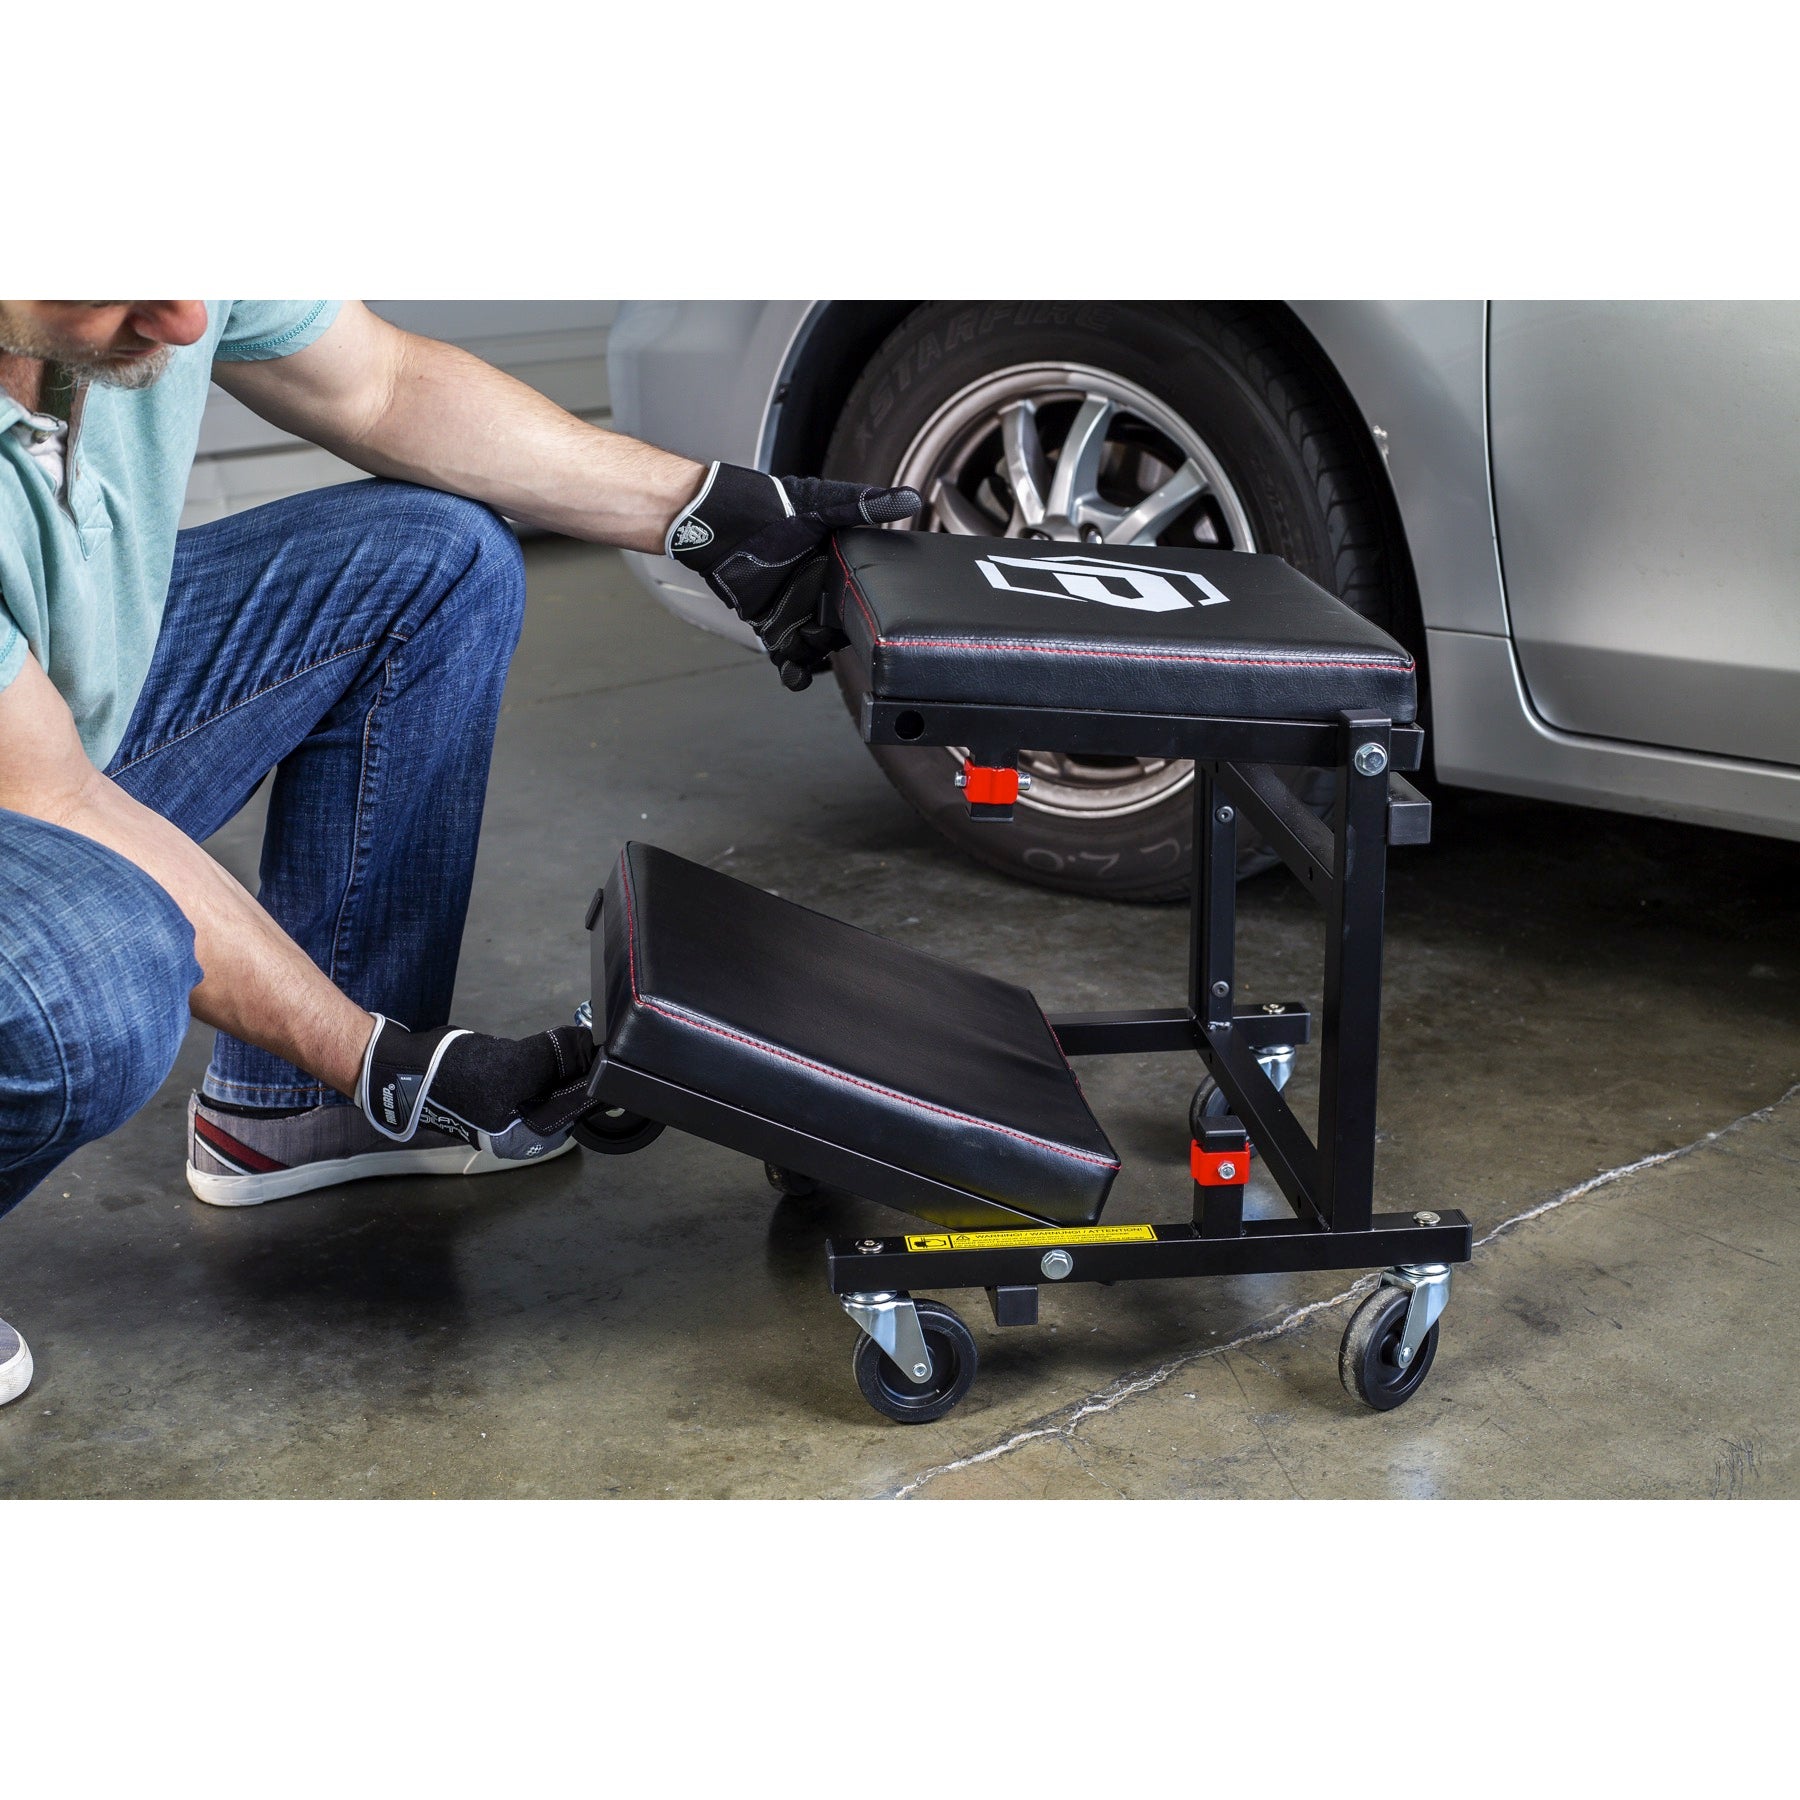 2-in-1 Low Creeper Seat / Roller Stool